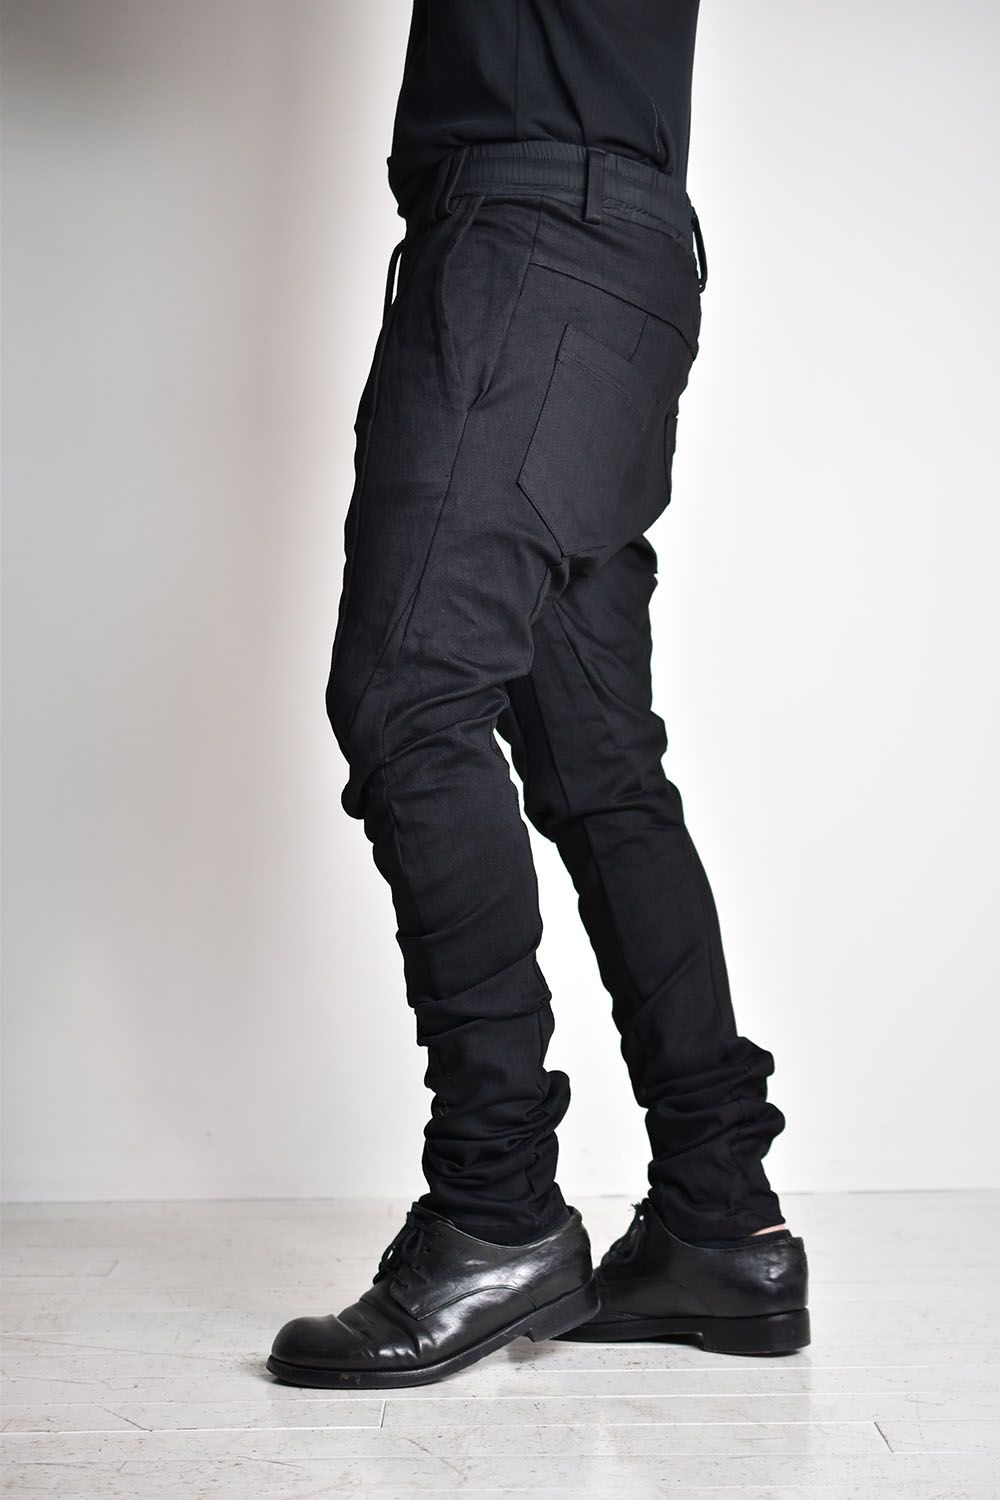 Anatomical Fitted Long Pants"Black" /フィットロングパンツ"ブラック"